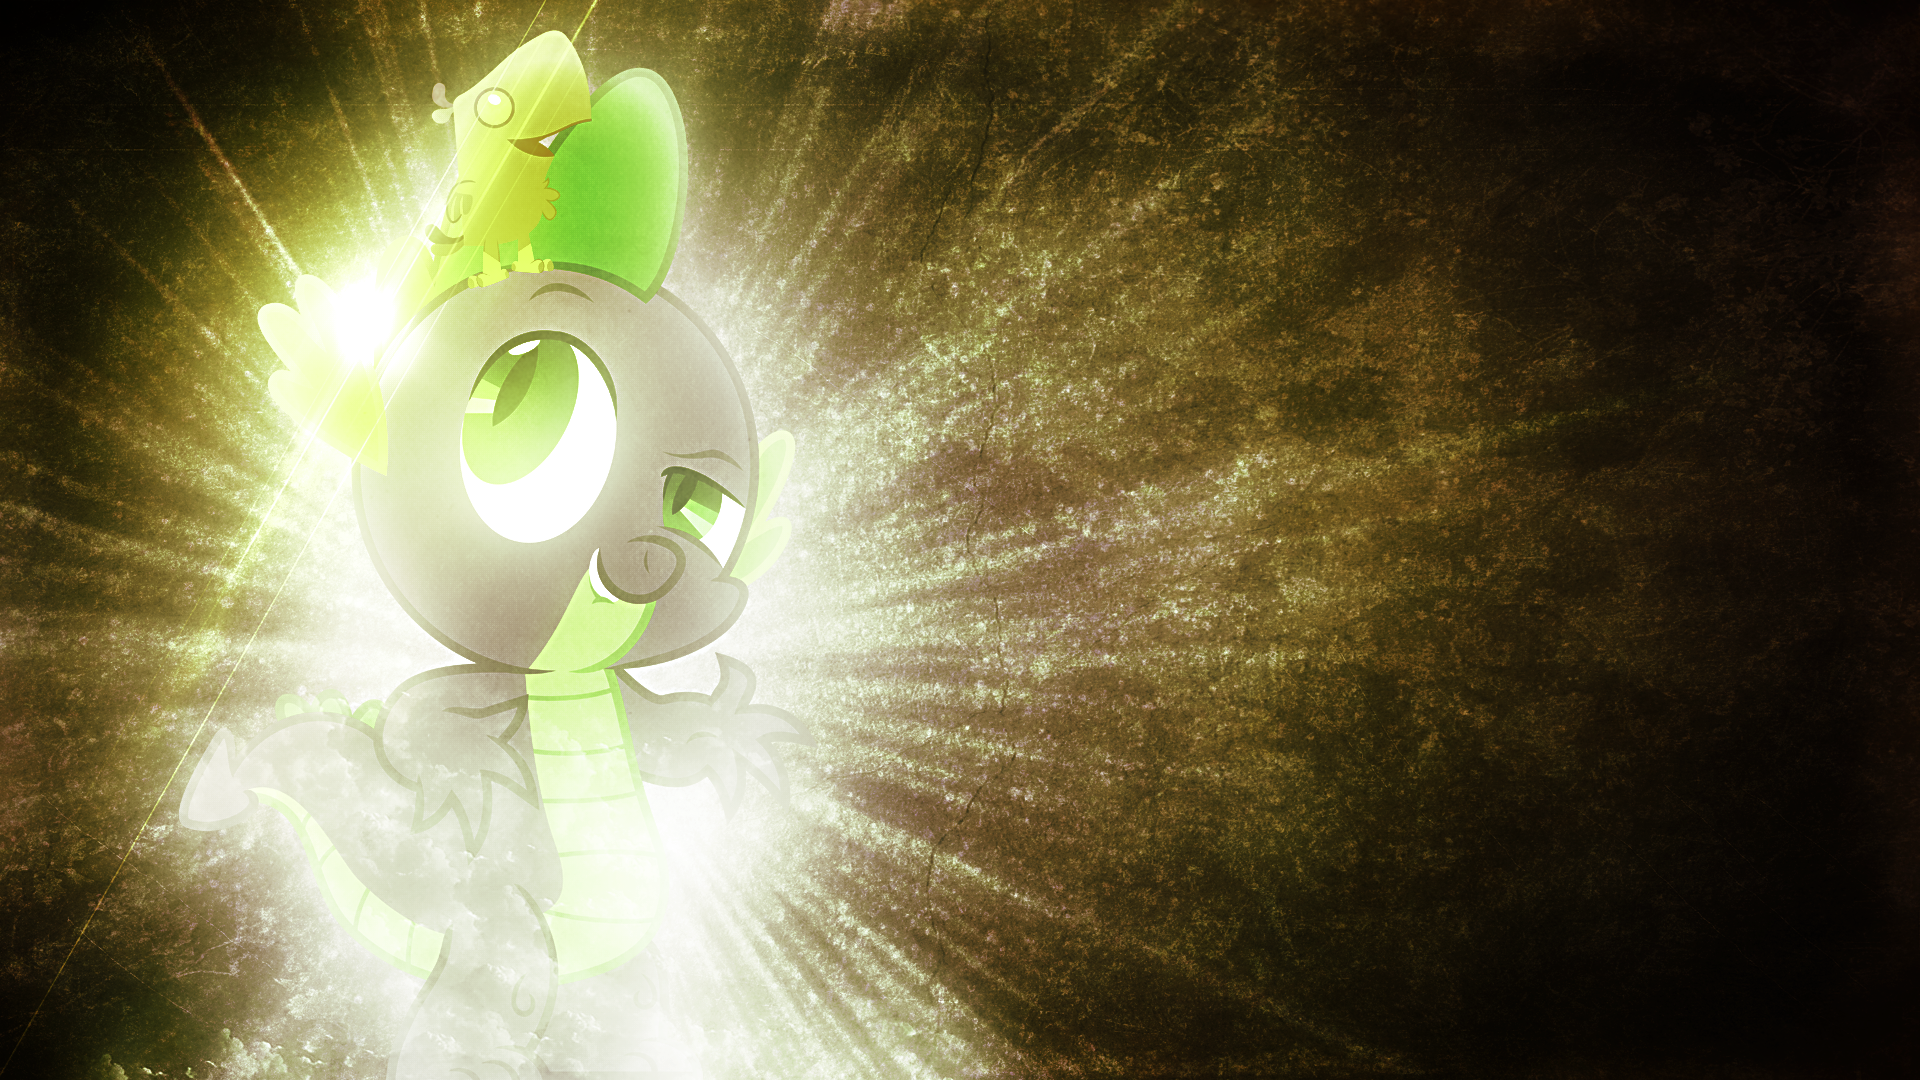 Spike And Peewee - Wallpaper by Royal-Exo and Tzolkine